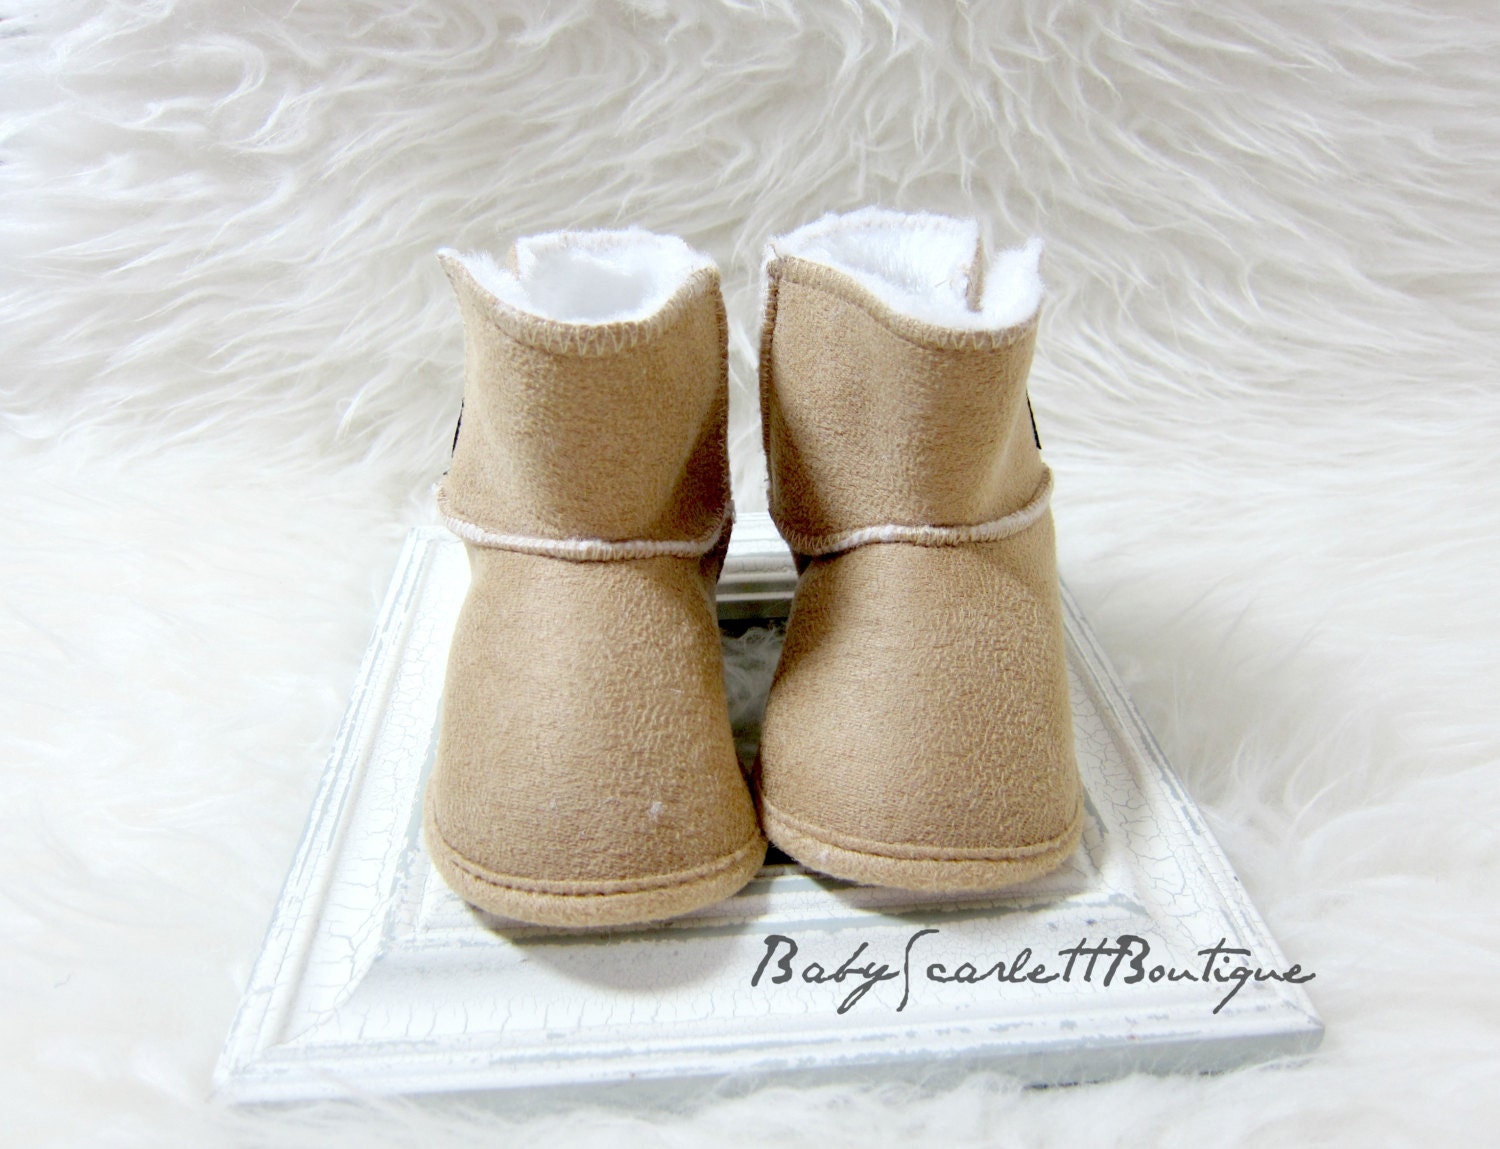 Bully neef affix Baby Winter Boots - Etsy